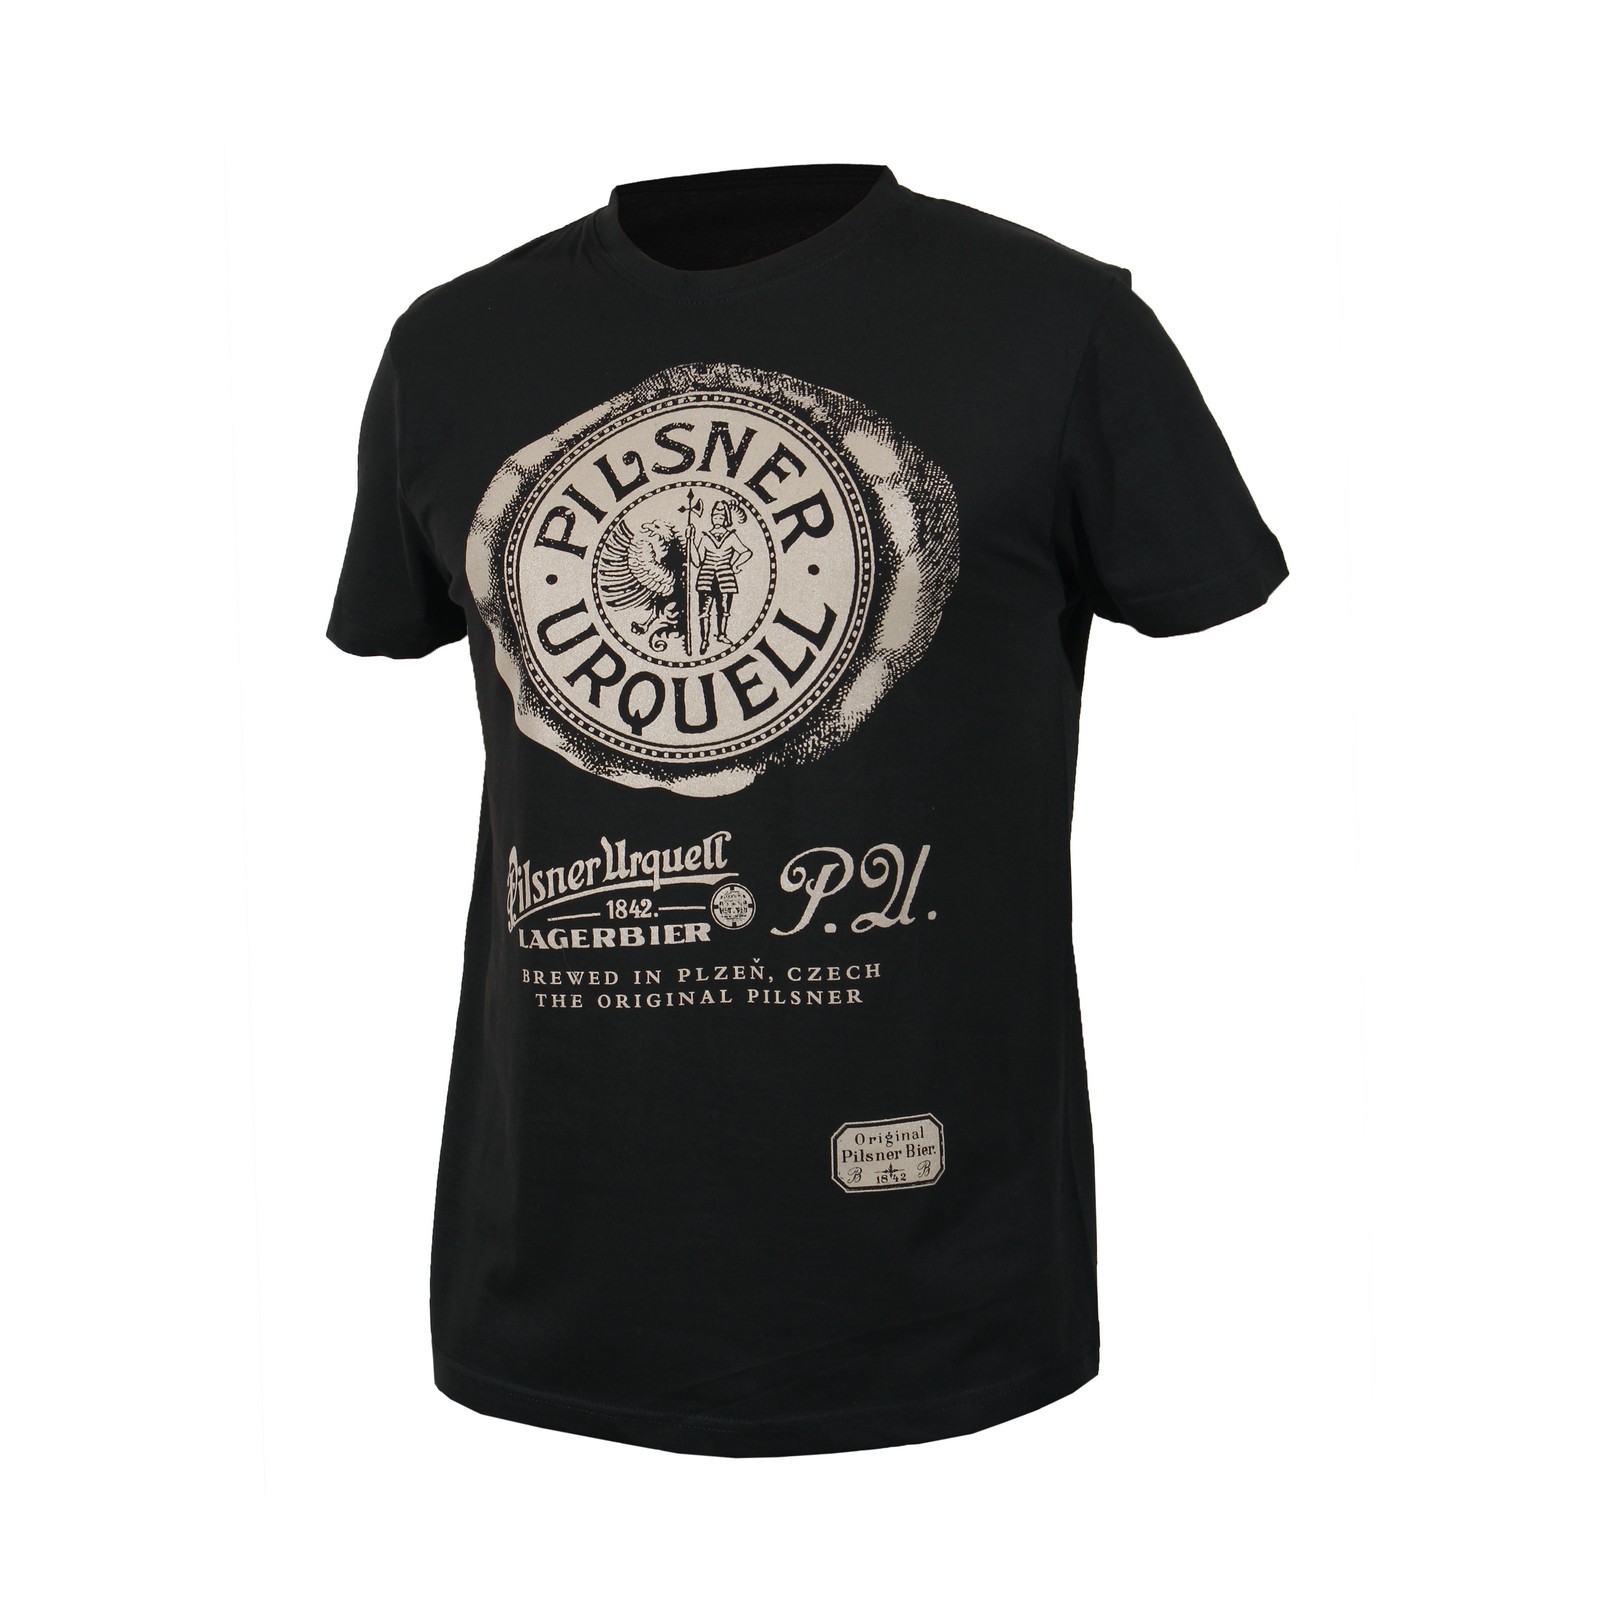 Pilsner Urquell retro T-shirt Black with embroidery